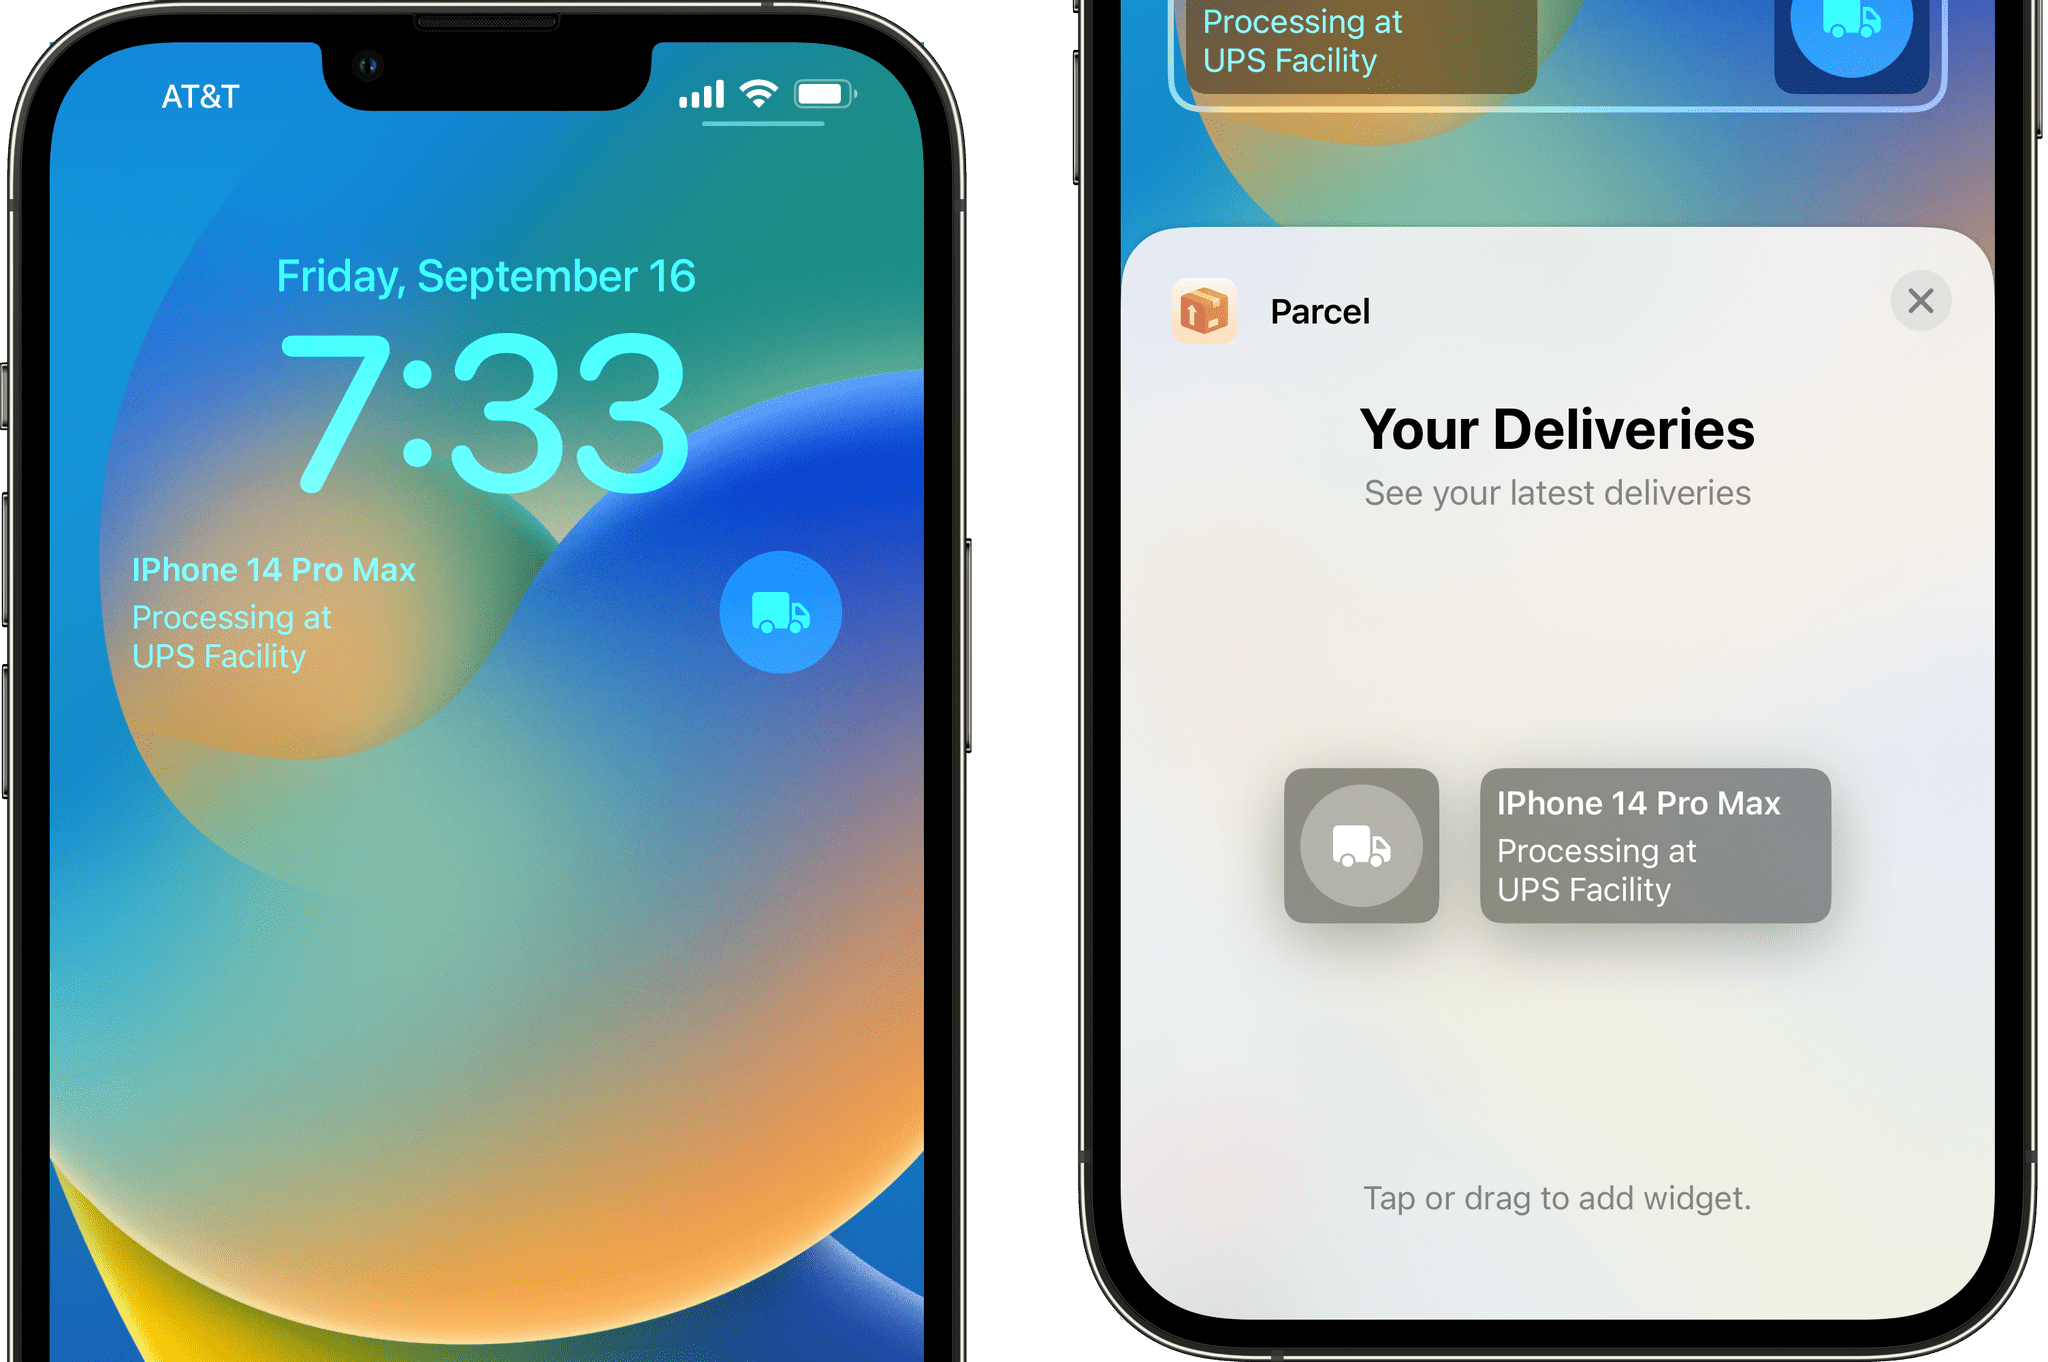 Package tracking is the sort of glanceable information that's perfect for Lock Screen widgets.